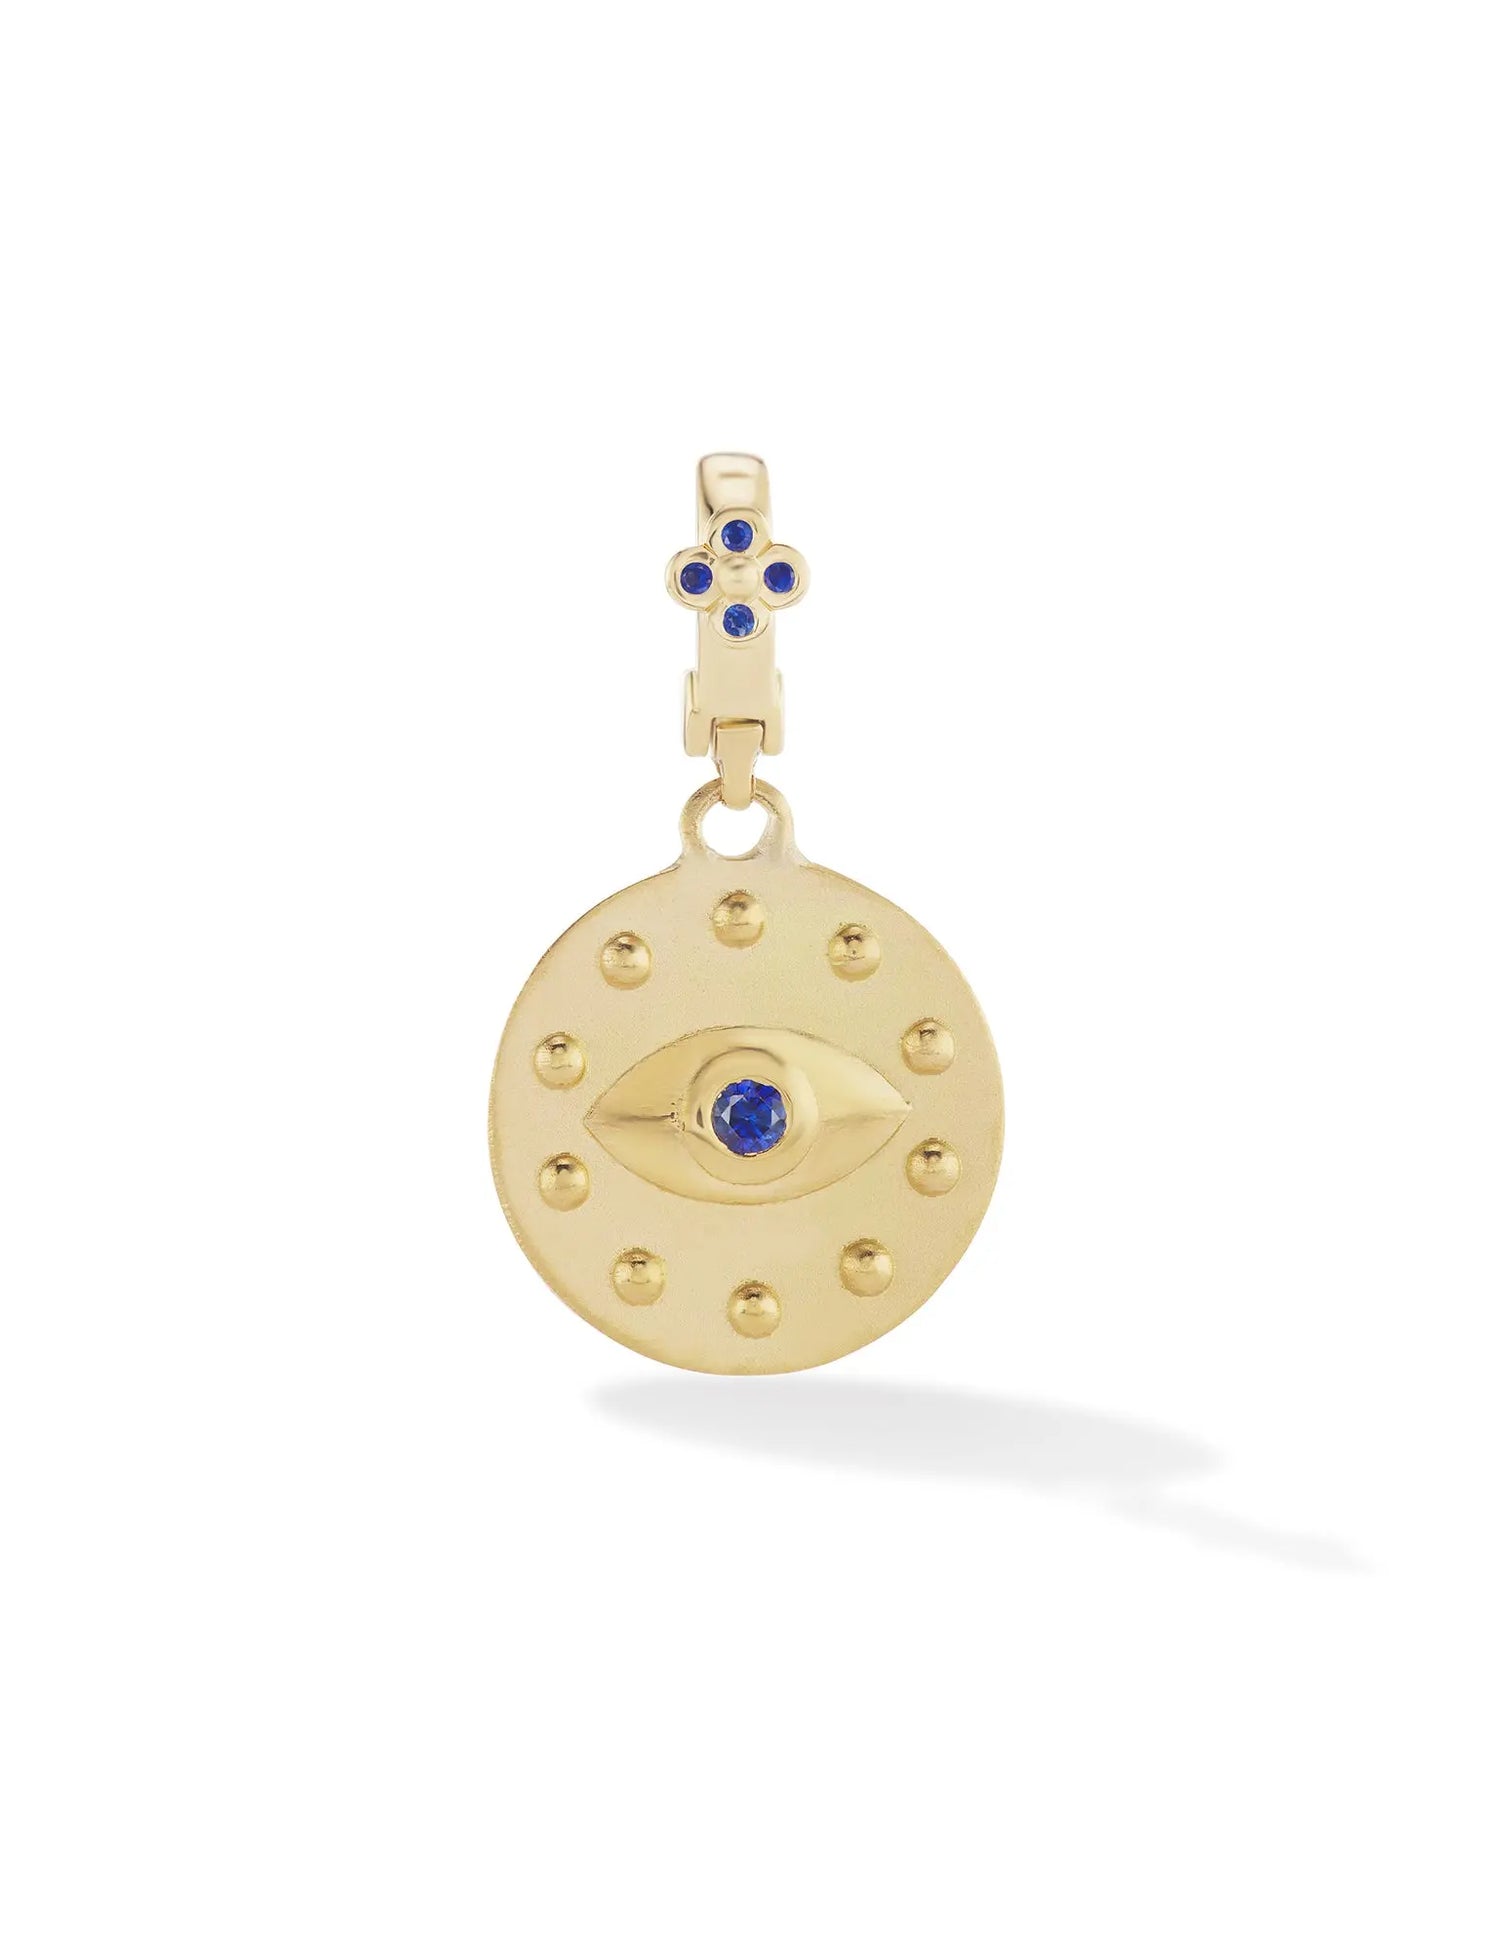 18k yellow gold blue sapphire evil eye pendant. Designed by Orly Marcel